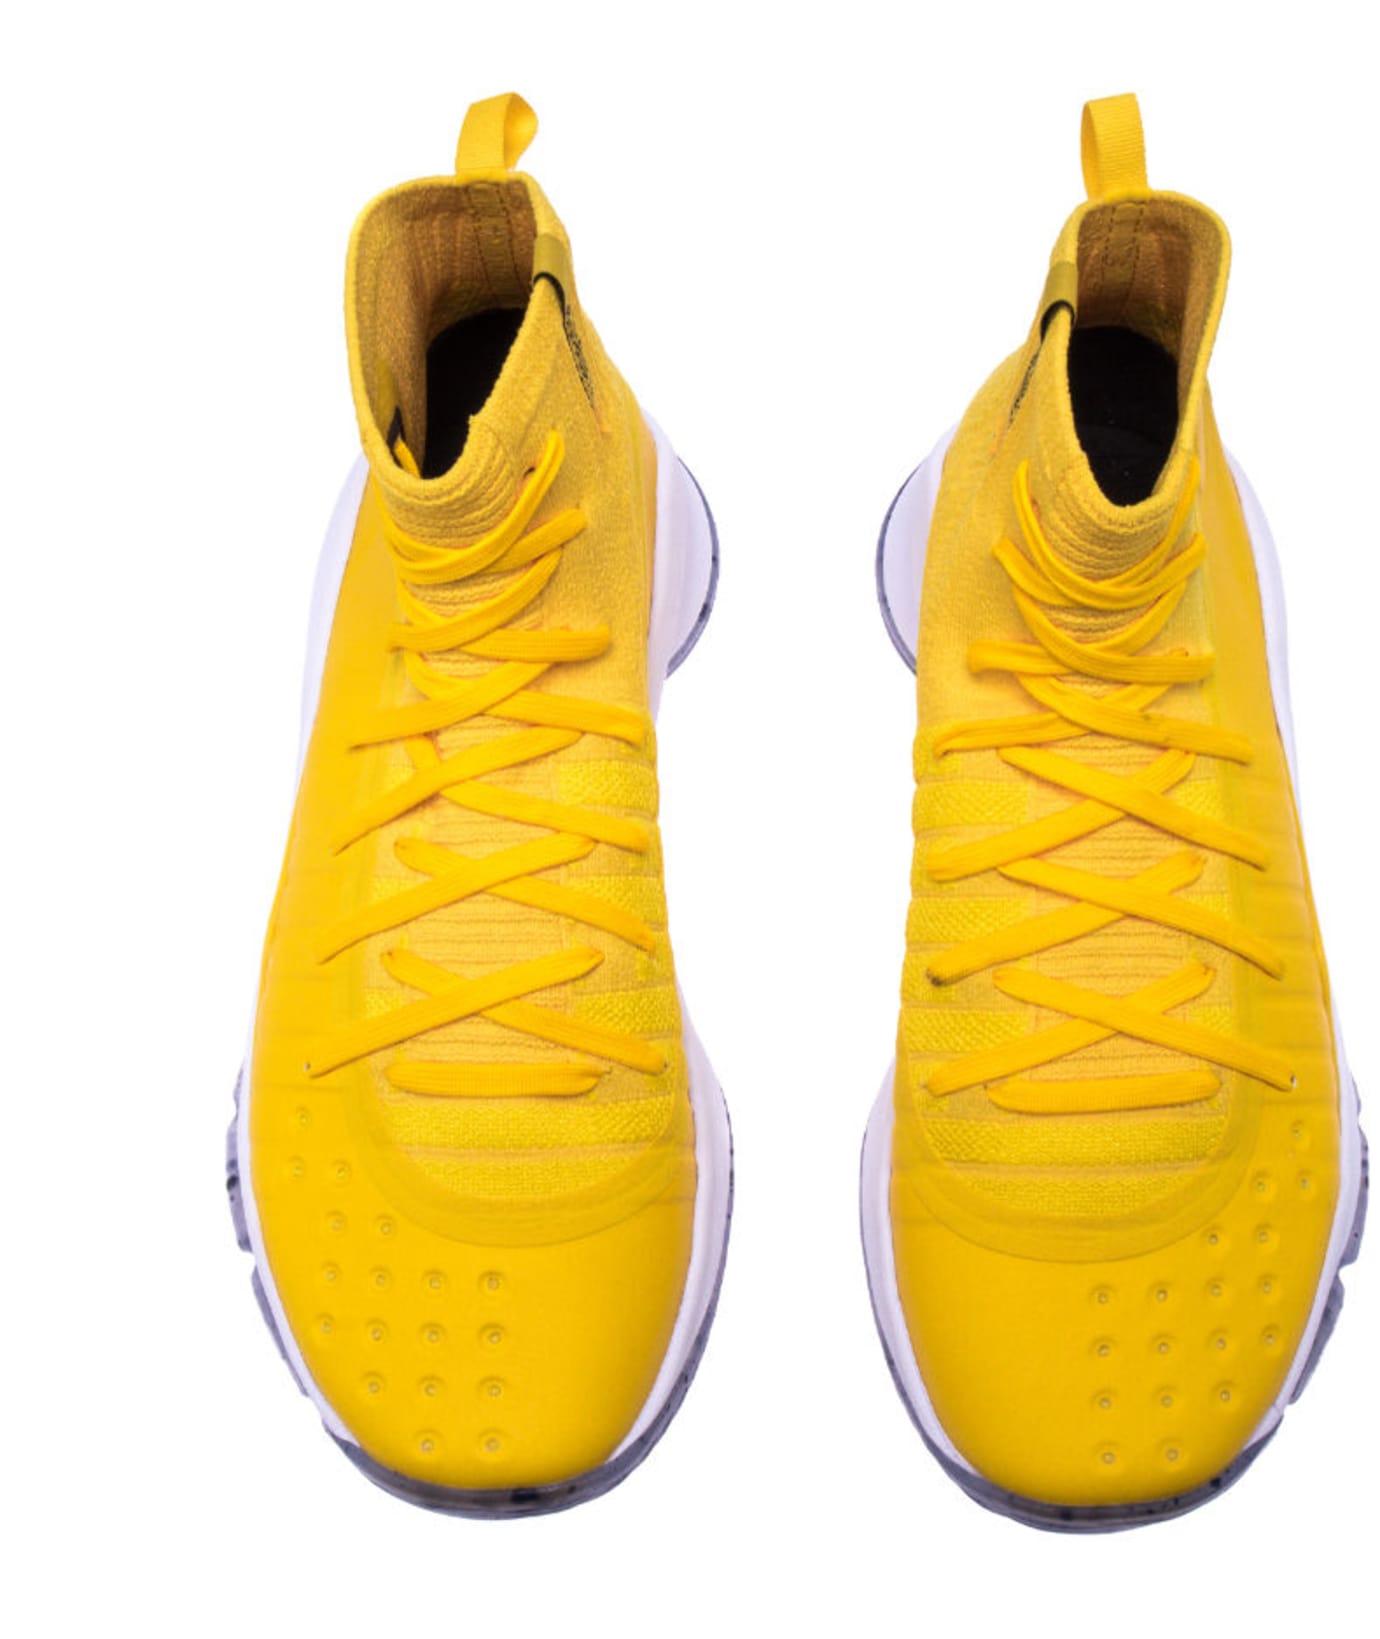 Shoe Palace Under Armour Curry 4 'Yellow/Blue' 1298306-700 (Top)